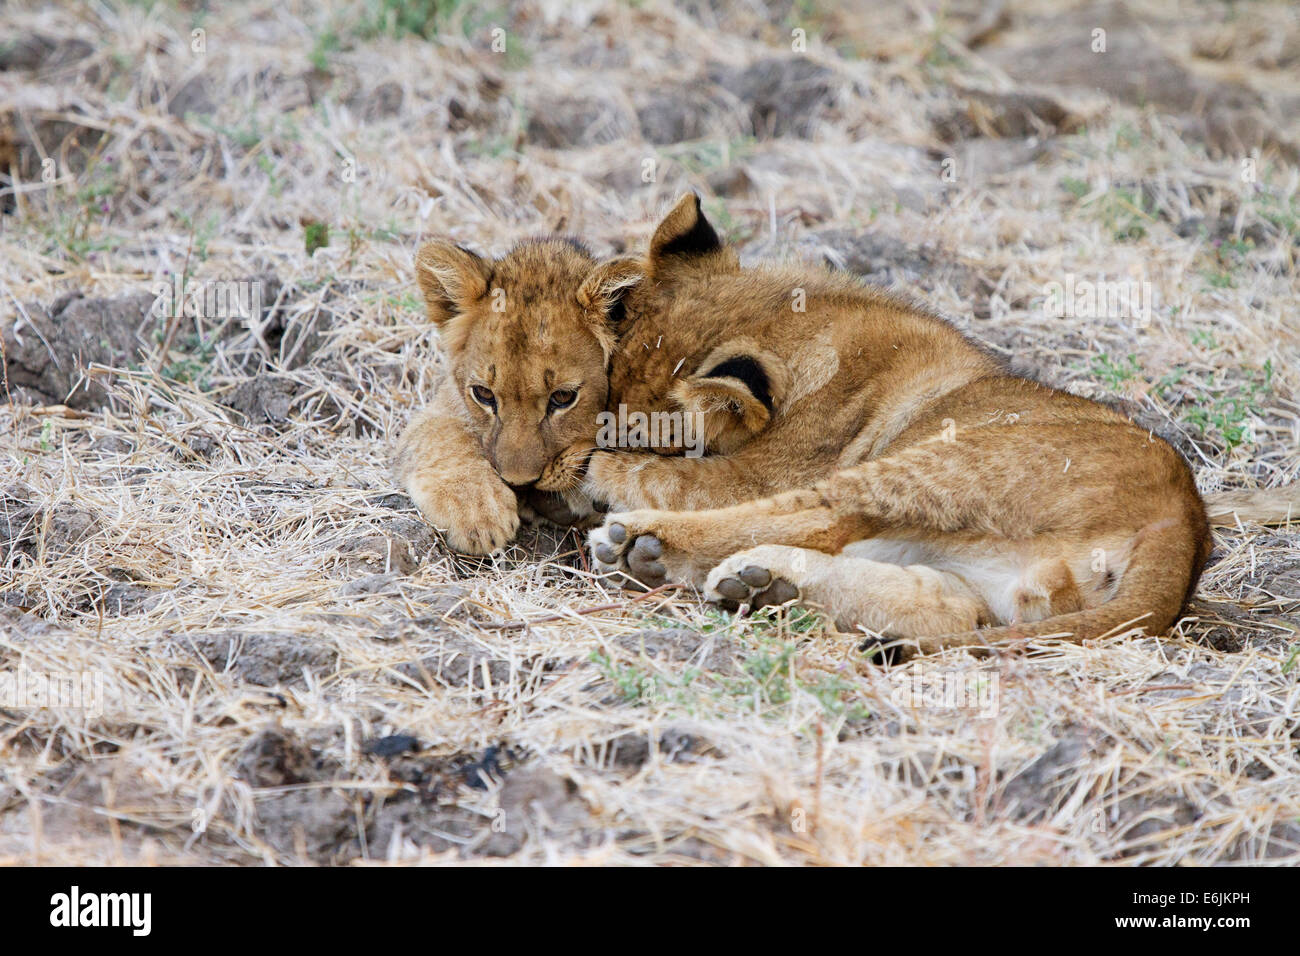 Lion cubs giocare insieme, Zambia, Africa Foto Stock